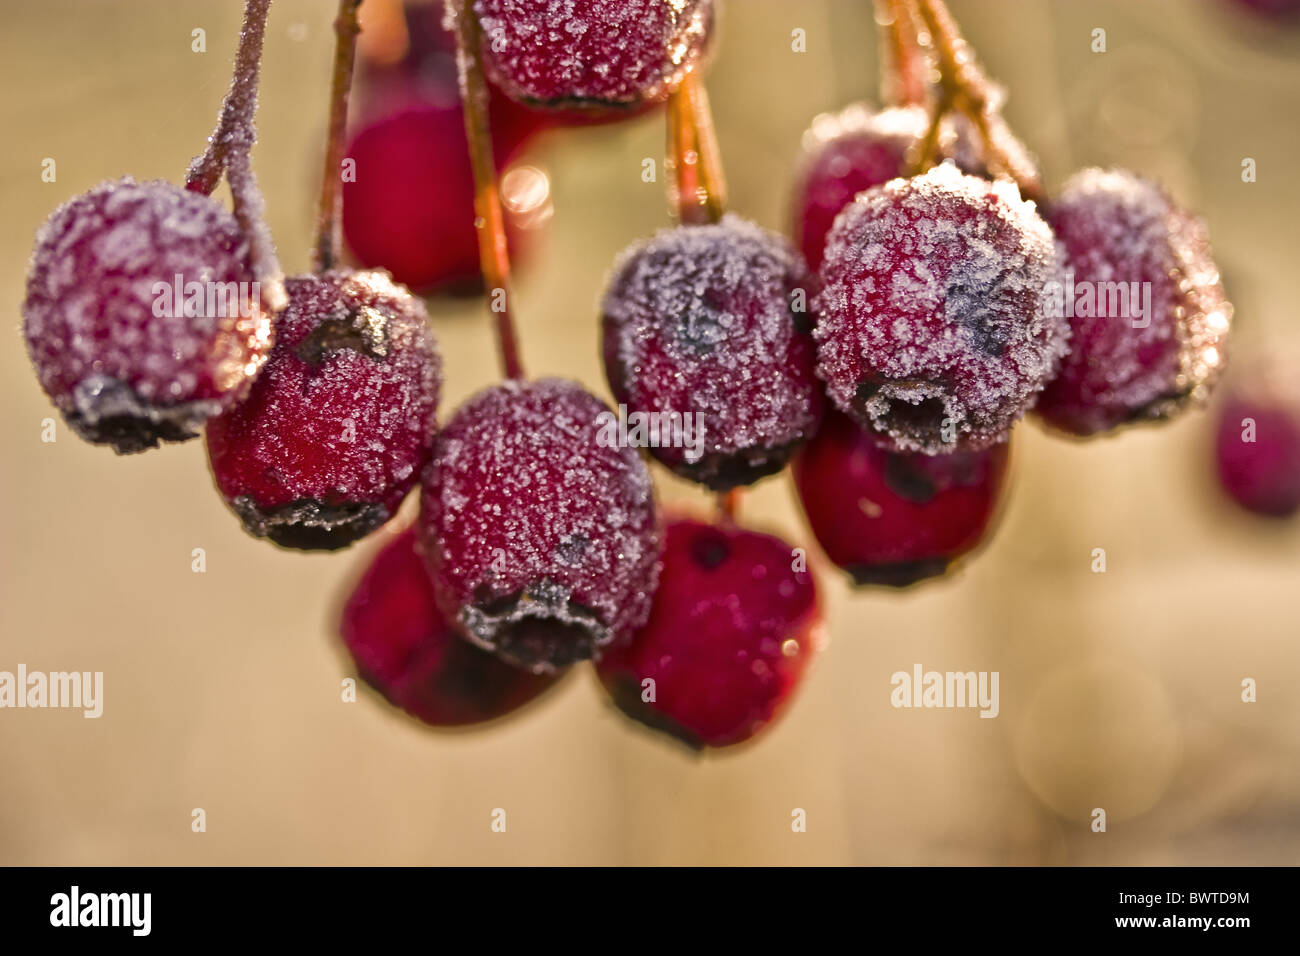 Autumn Autumnal Berries Berry Britain British Bunch Bunches Close up Close up Close Cold Common Covered Crataegus Dangle Stock Photo